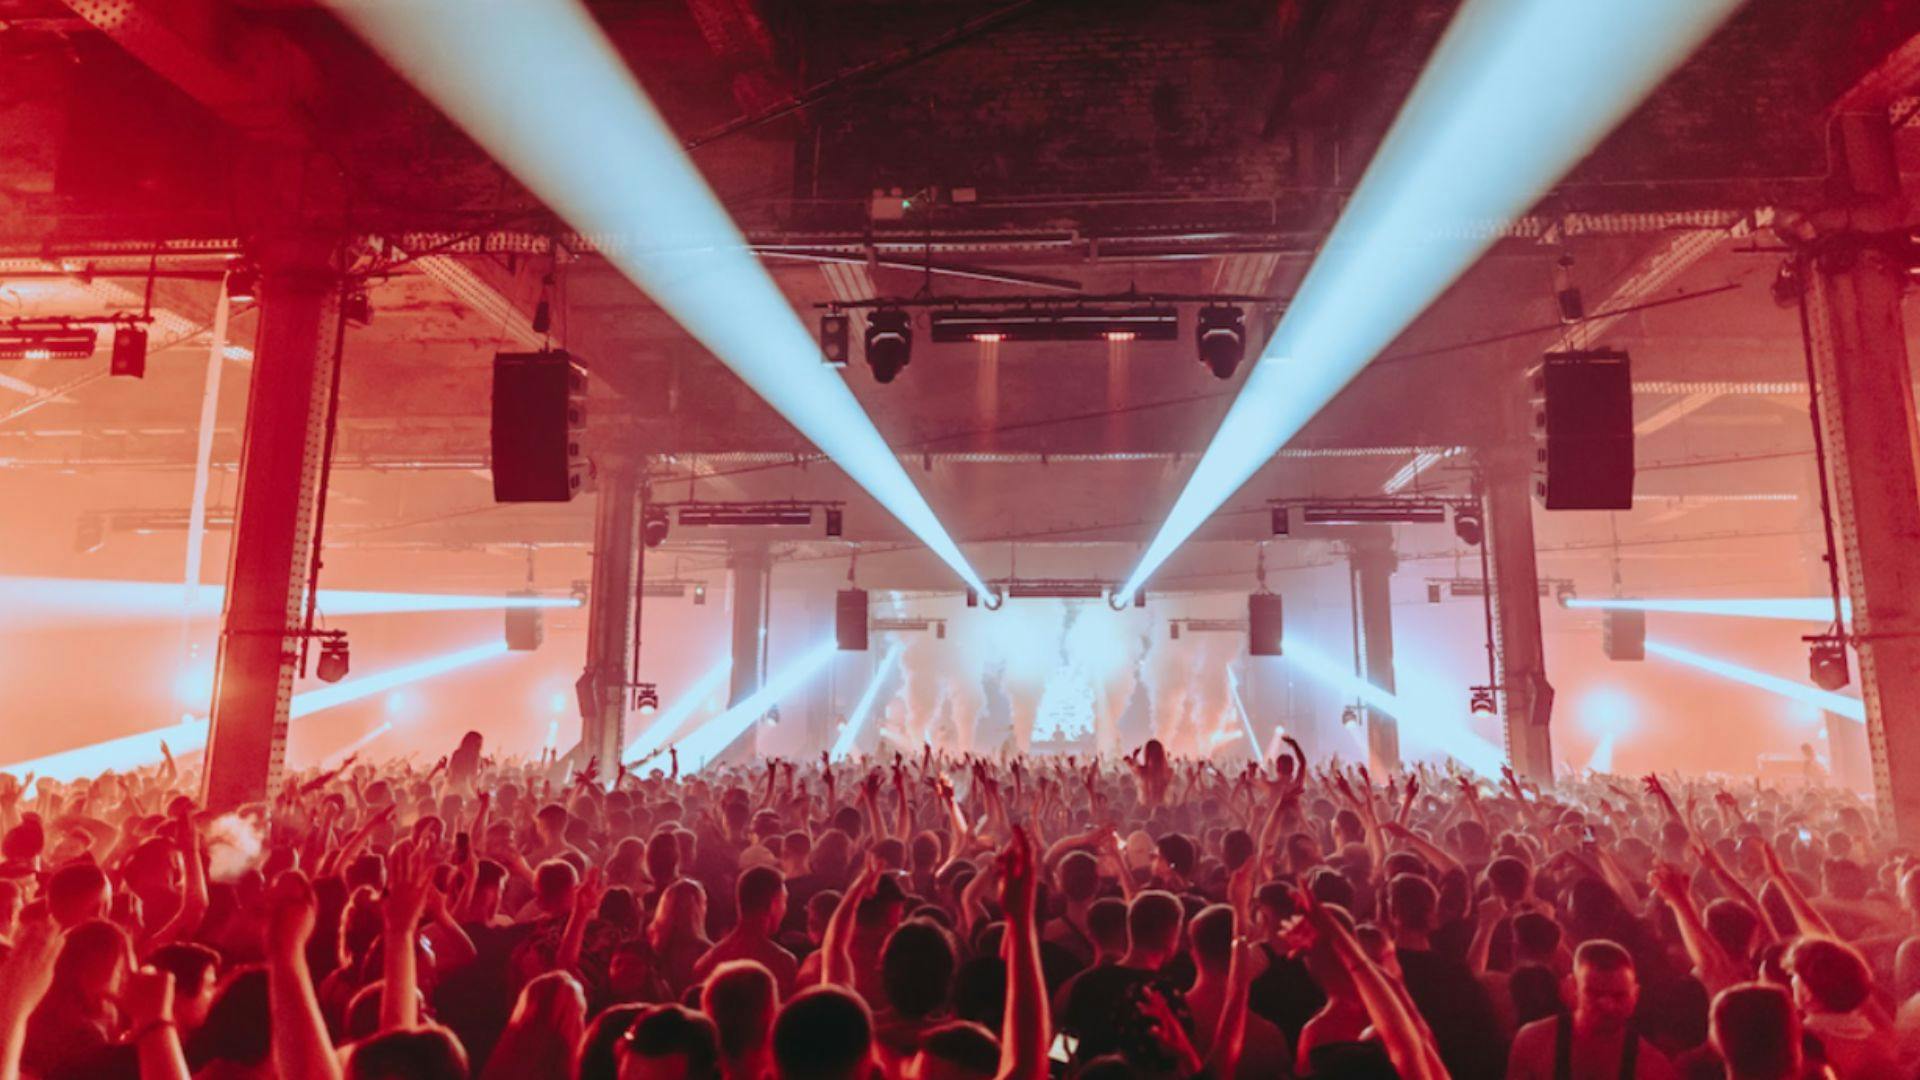 Unmissable: The Top 5 Student Events in Manchester for Freshers